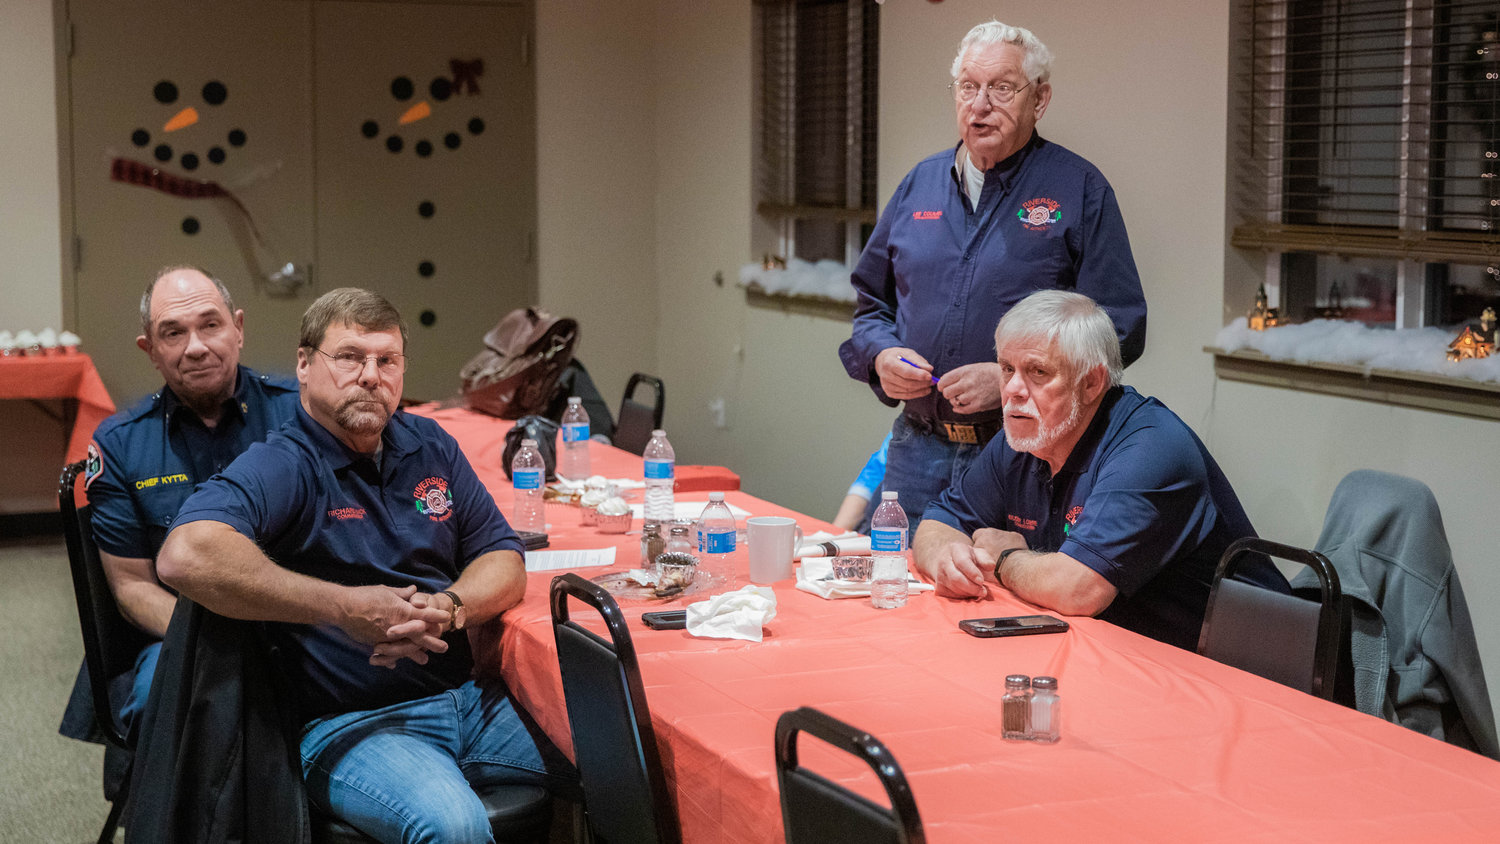 Lee Coumbs introduces two new Fire Commissioners for Riverside Fire Authority, Richard Mack and Buddy Lowre, during a Monday night meeting at the Lewis County Fire District 3 building in Mossyrock.